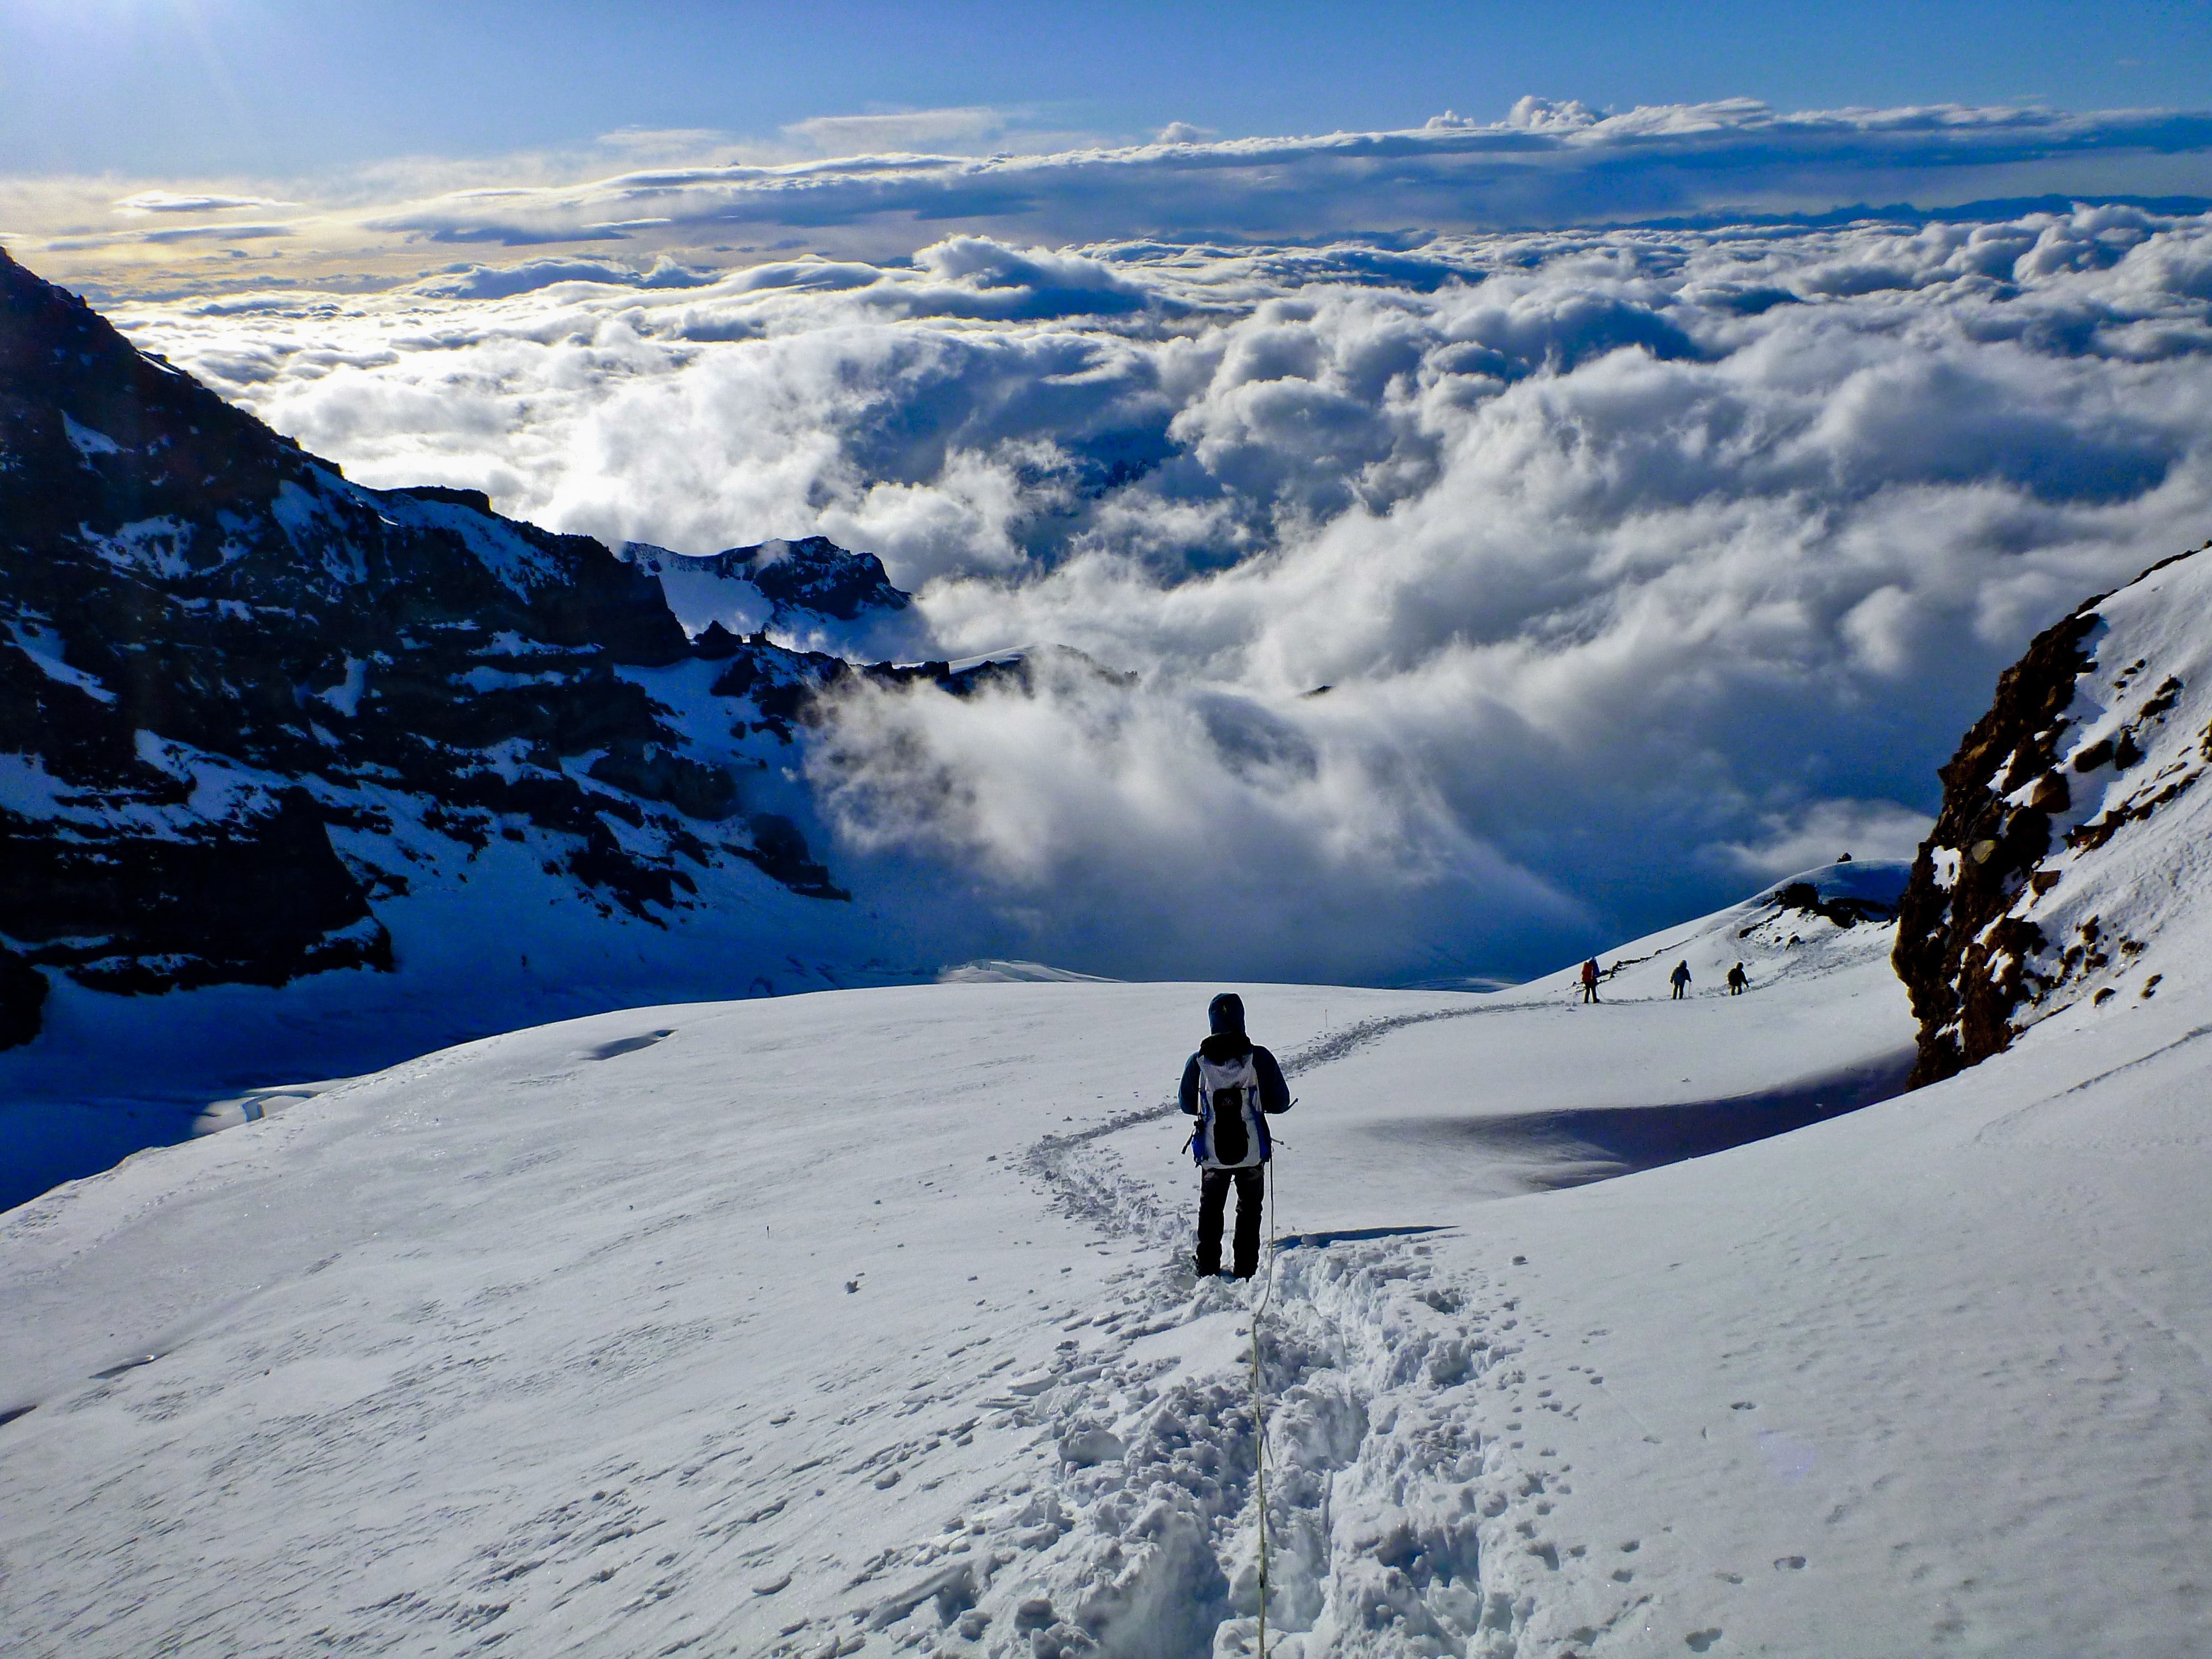 snow, mountains, clouds, cold temperature, winter, leisure activity